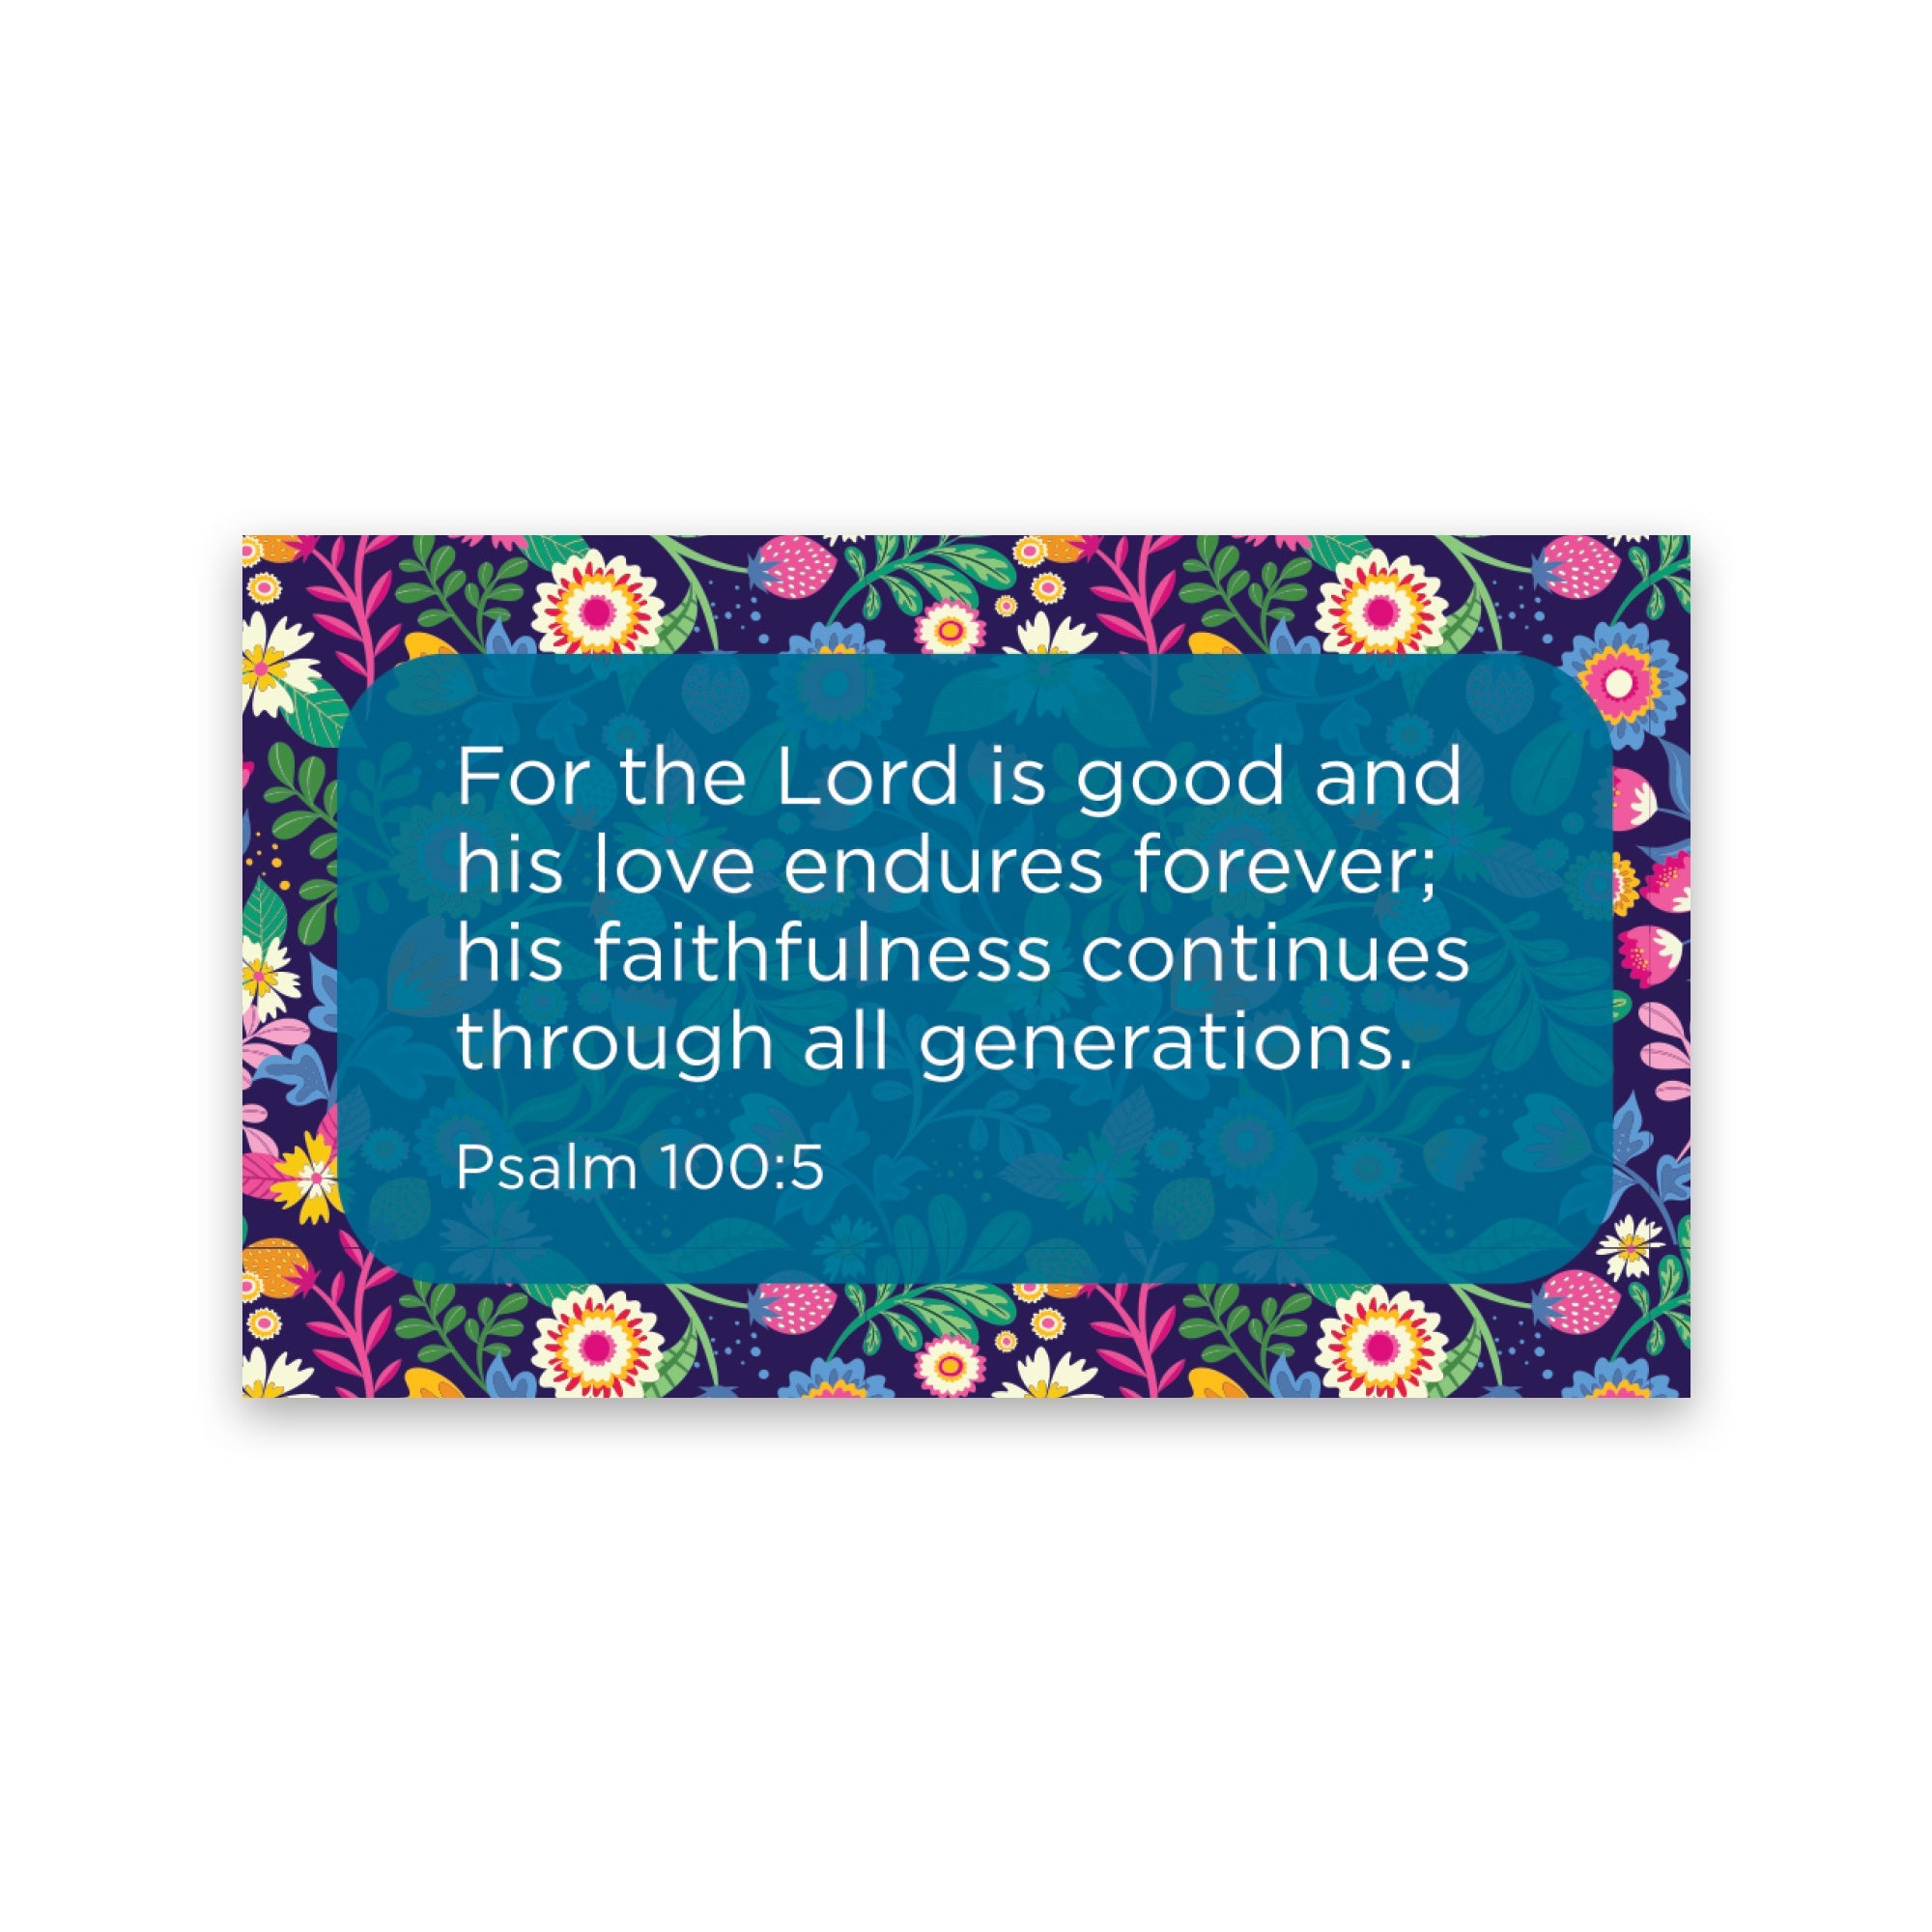 For the Lord is good, Psalm 100:5, Pass Along Scripture Cards, Pack of 25